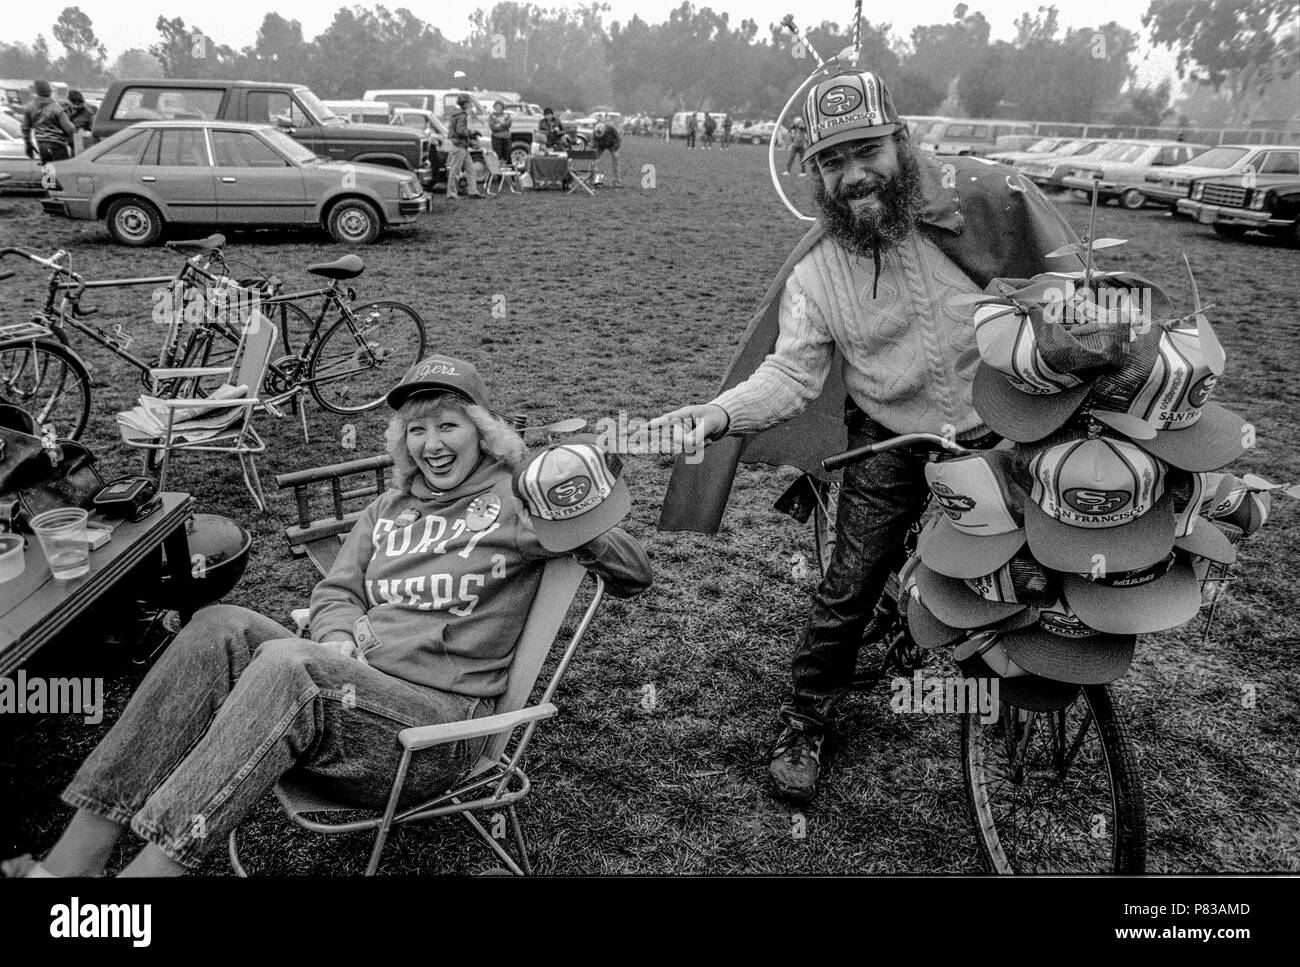 Stanford, California, USA. 20th Jan, 1985. Banjoman, Stacy Samuels, sells propeller hats at the Super Bowl XIX tailgate on the Stanford University campus. The San Francisco 49ers defeated the Miami Dolphins 38-16 on Sunday, January 20, 1985. Credit: Al Golub/ZUMA Wire/Alamy Live News Stock Photo